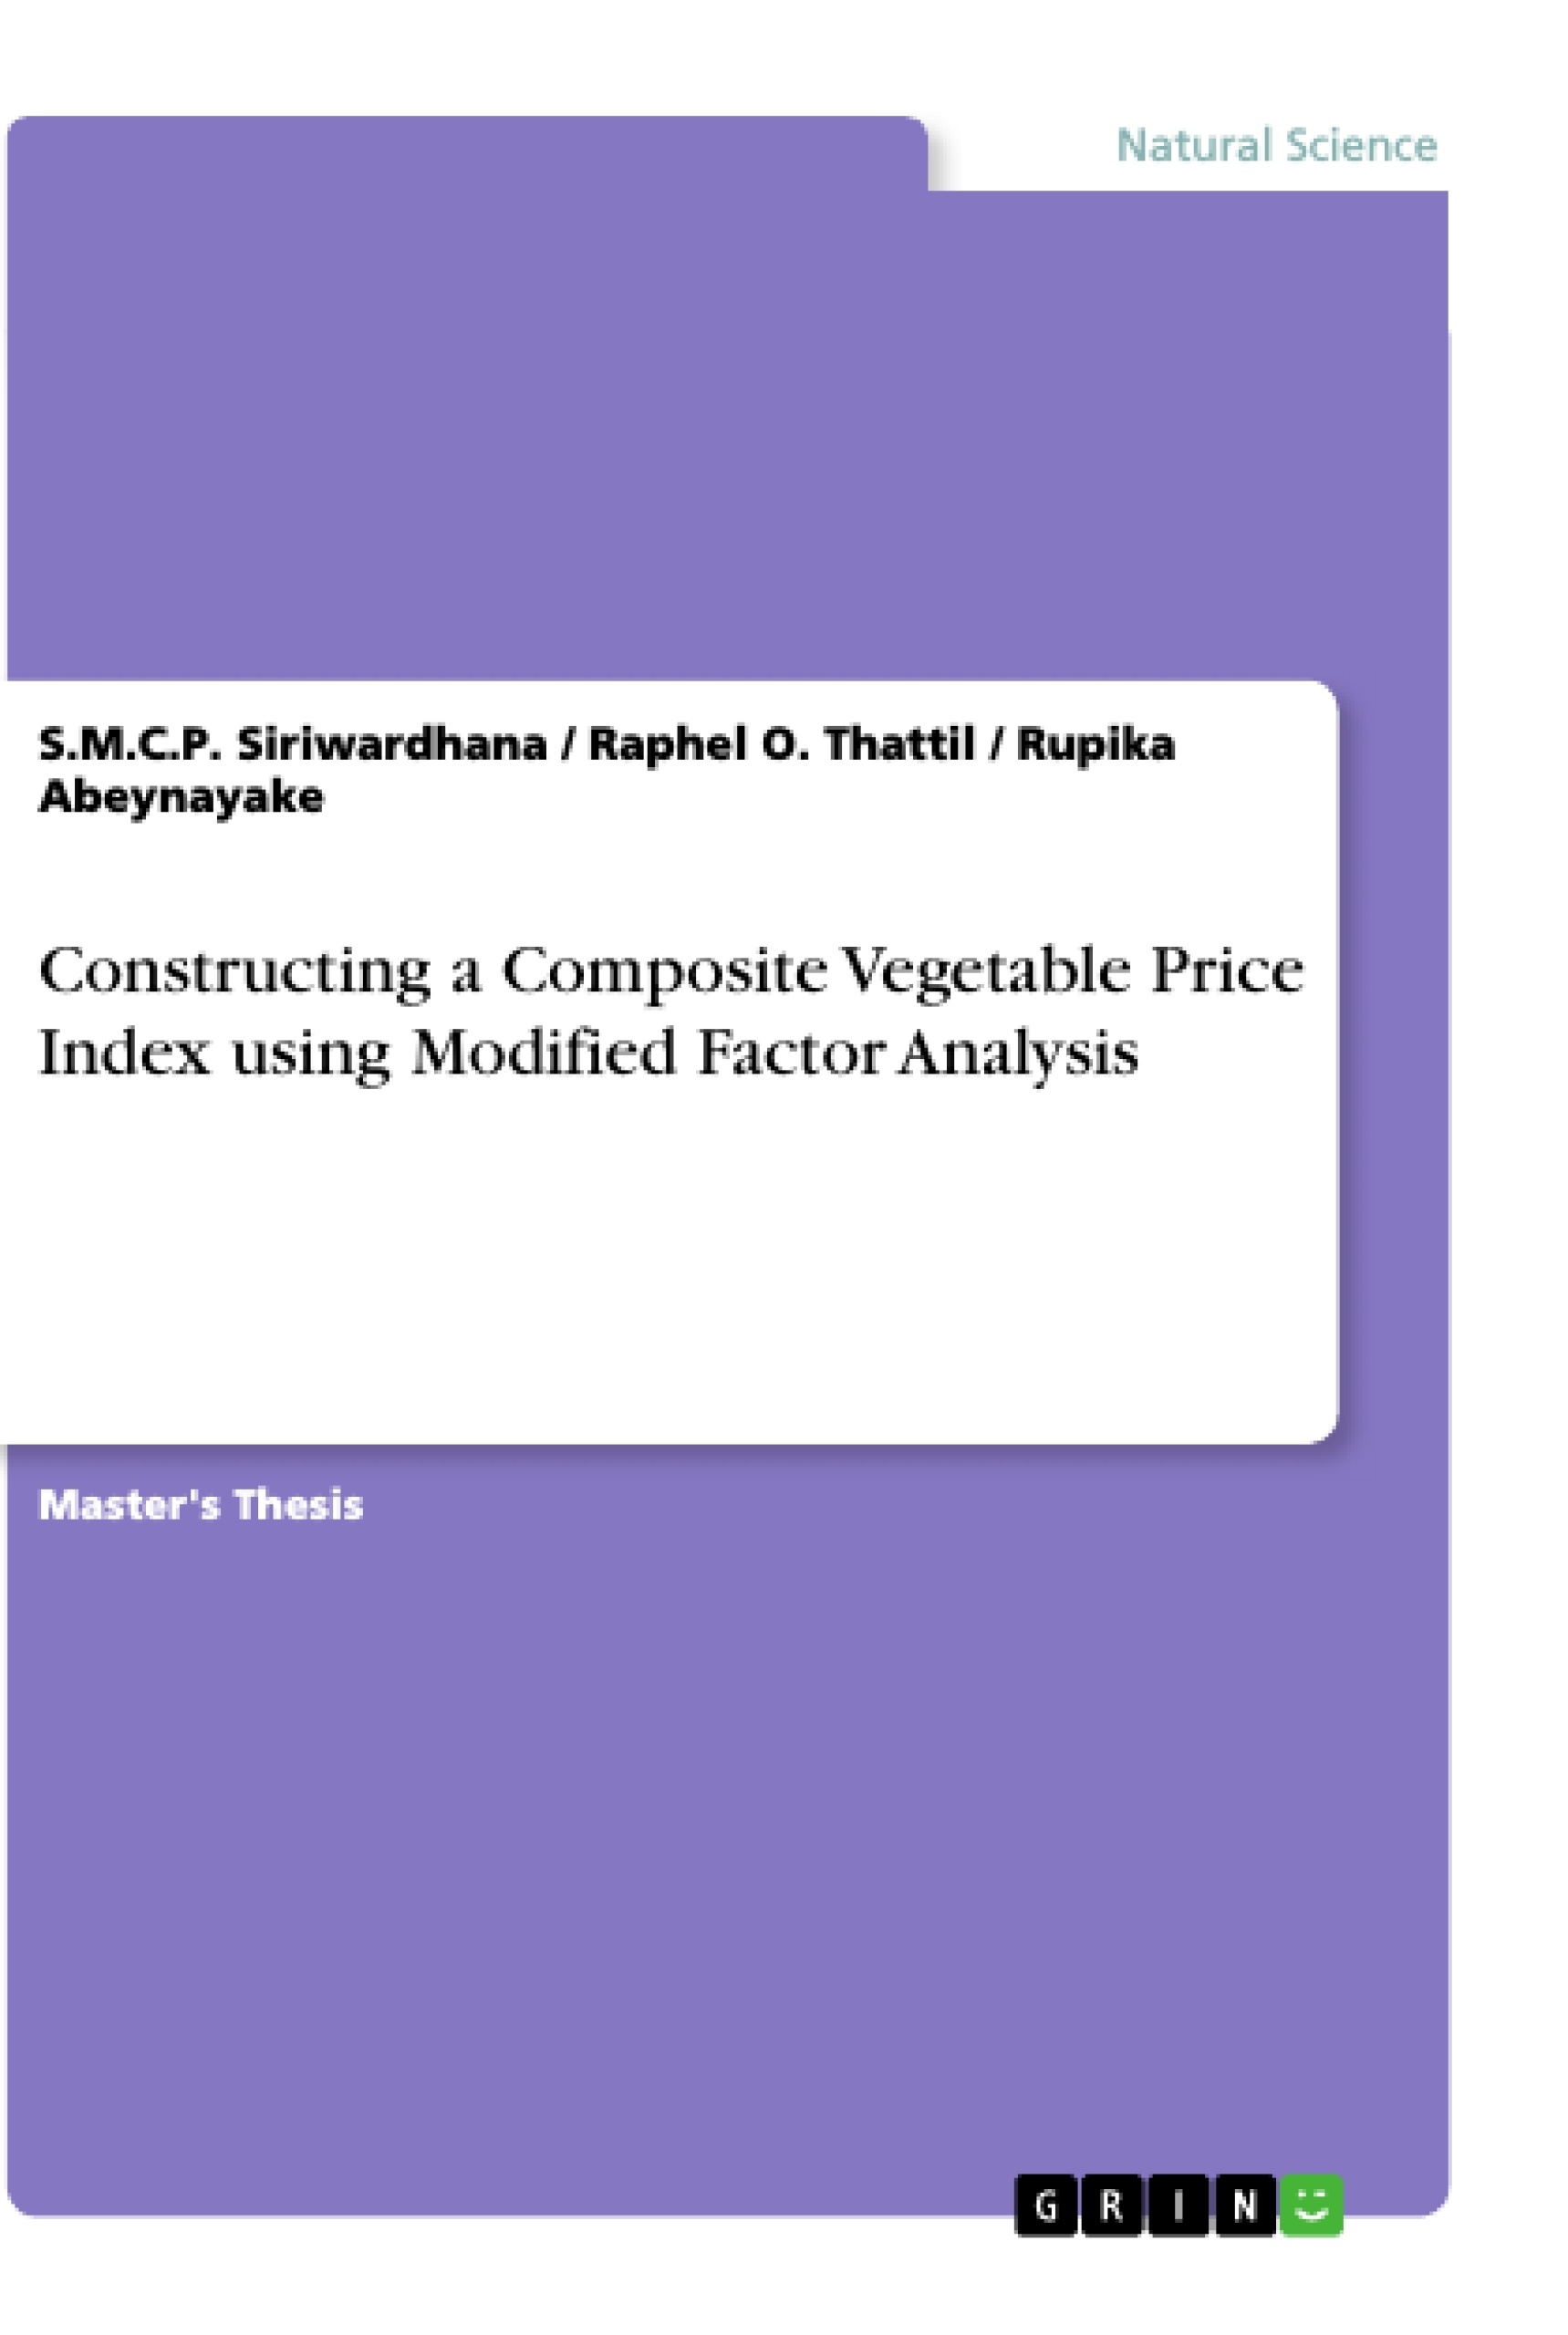 Titel: Constructing a Composite Vegetable Price Index using Modified Factor Analysis